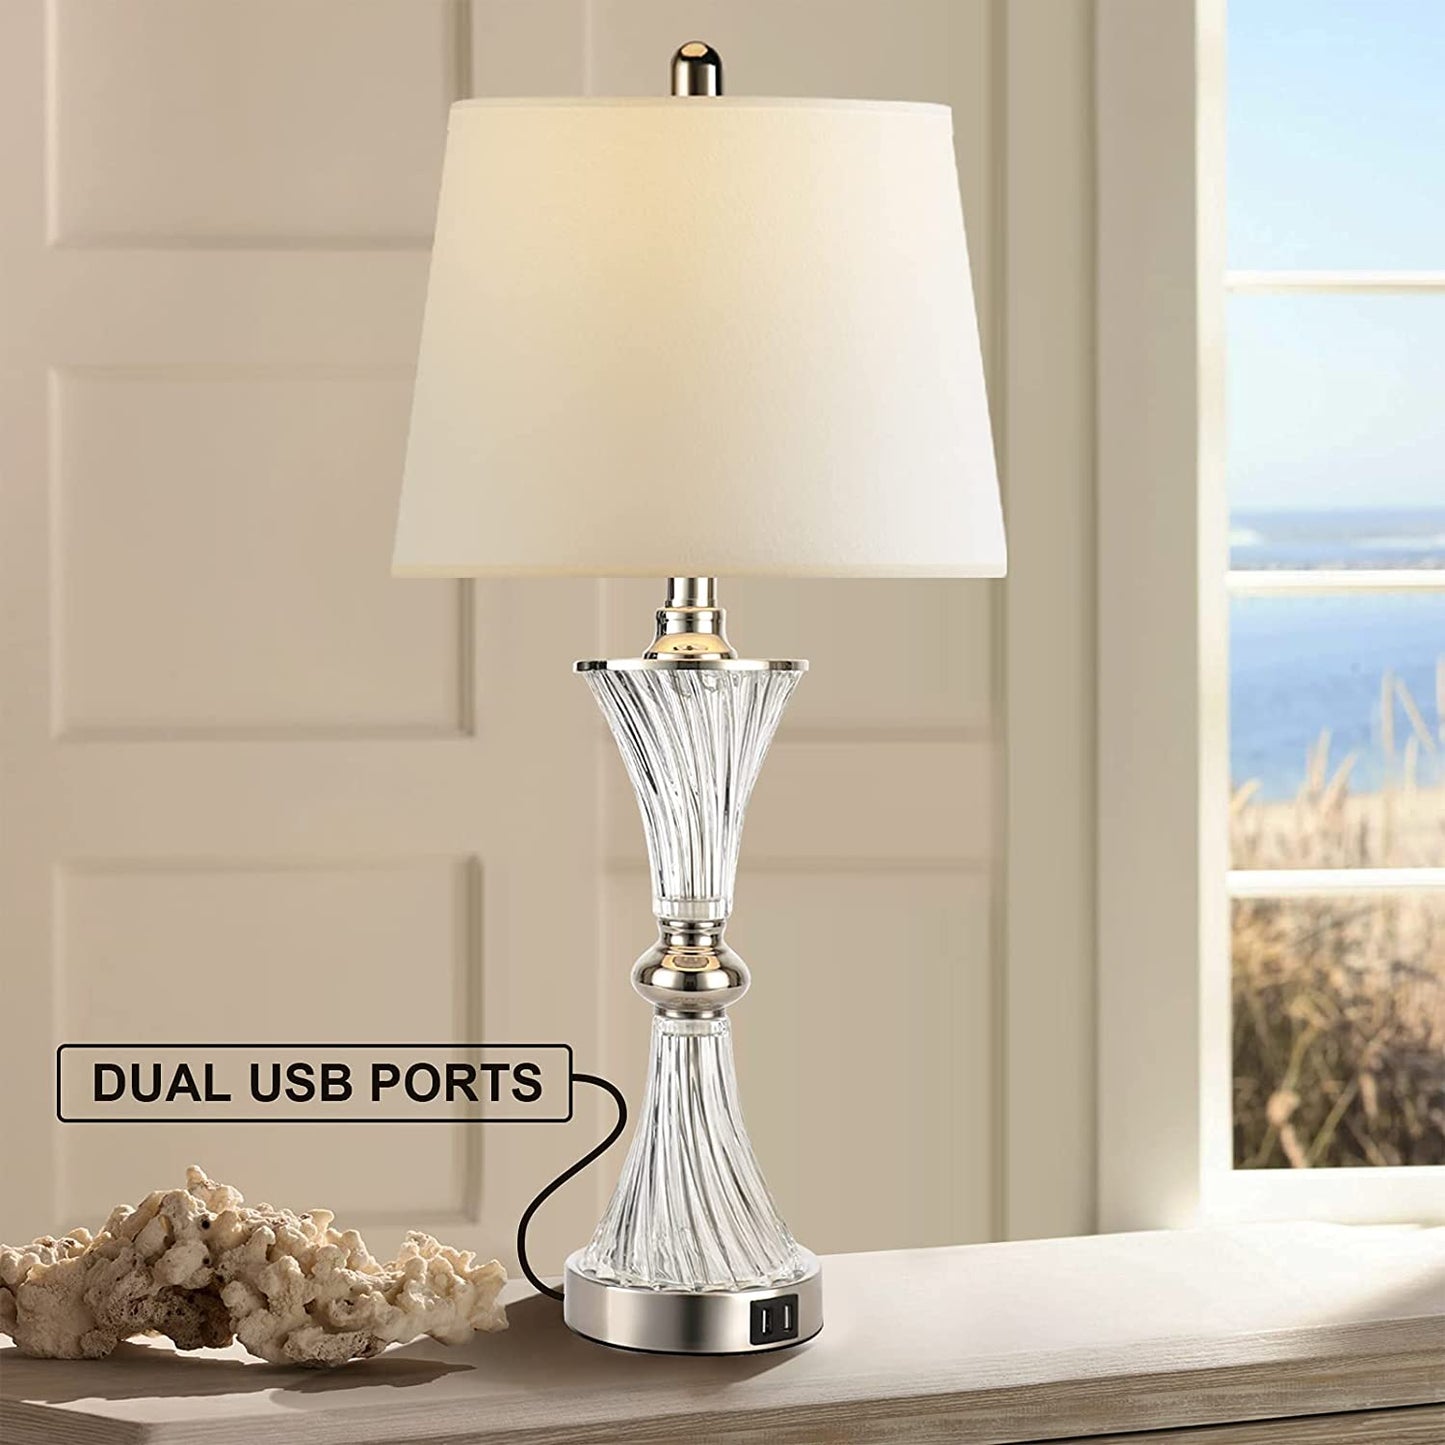 Touch Control Table Lamp for Bedrooms 3 Way Dimmable White Drum Shade Modern Bedsides Nightstand